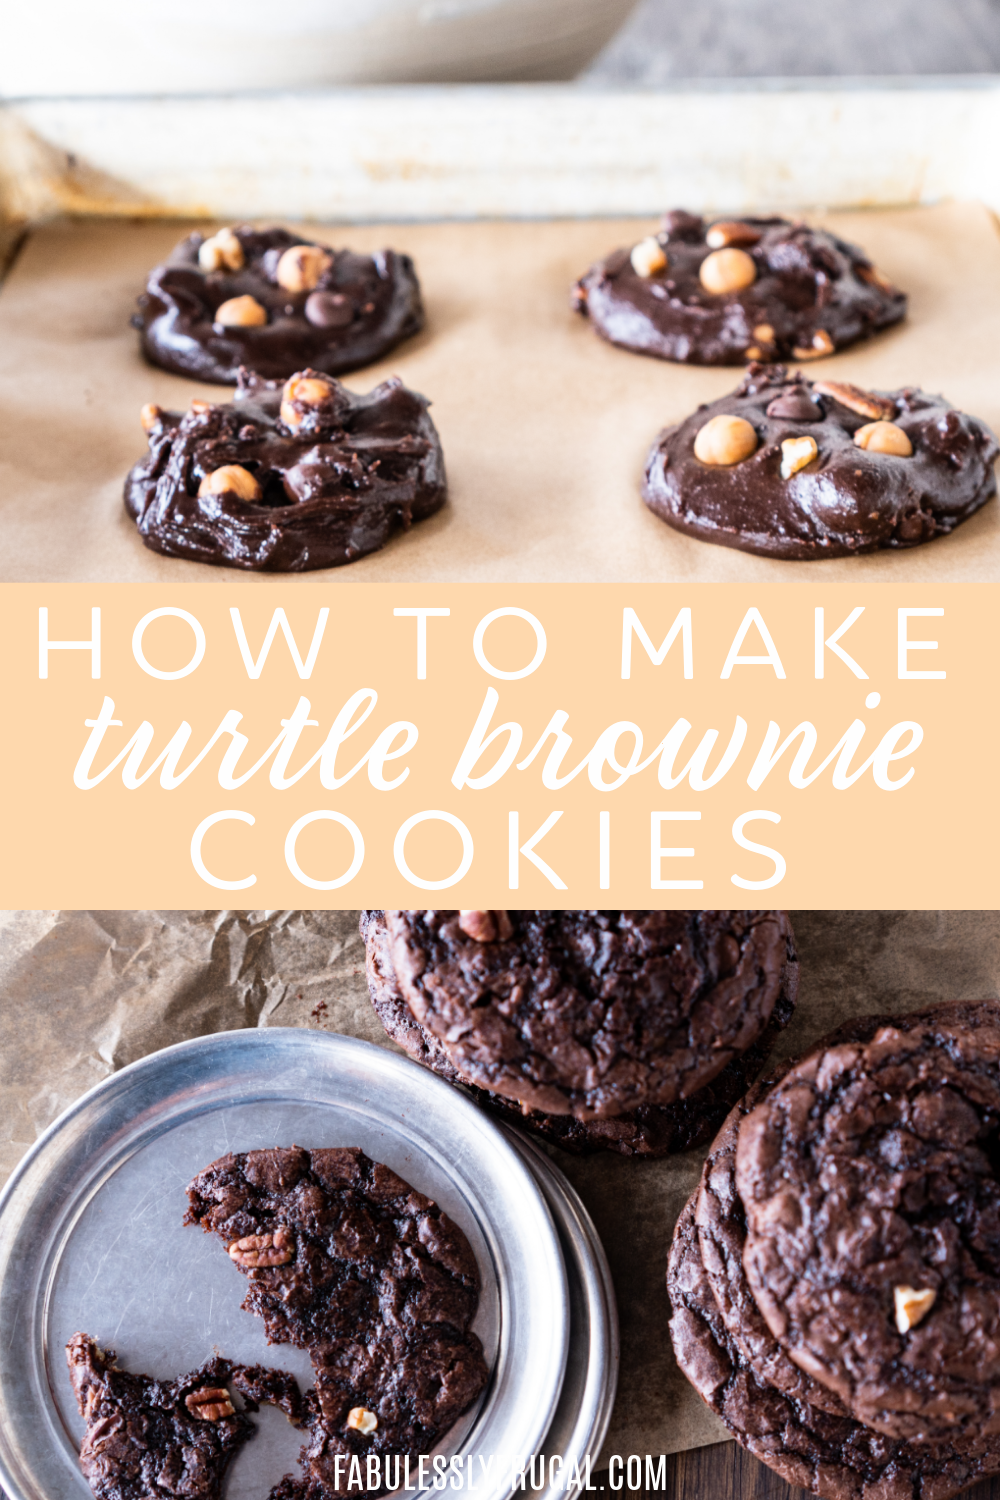 These turtle brownie cookies are the ultimate comfort food